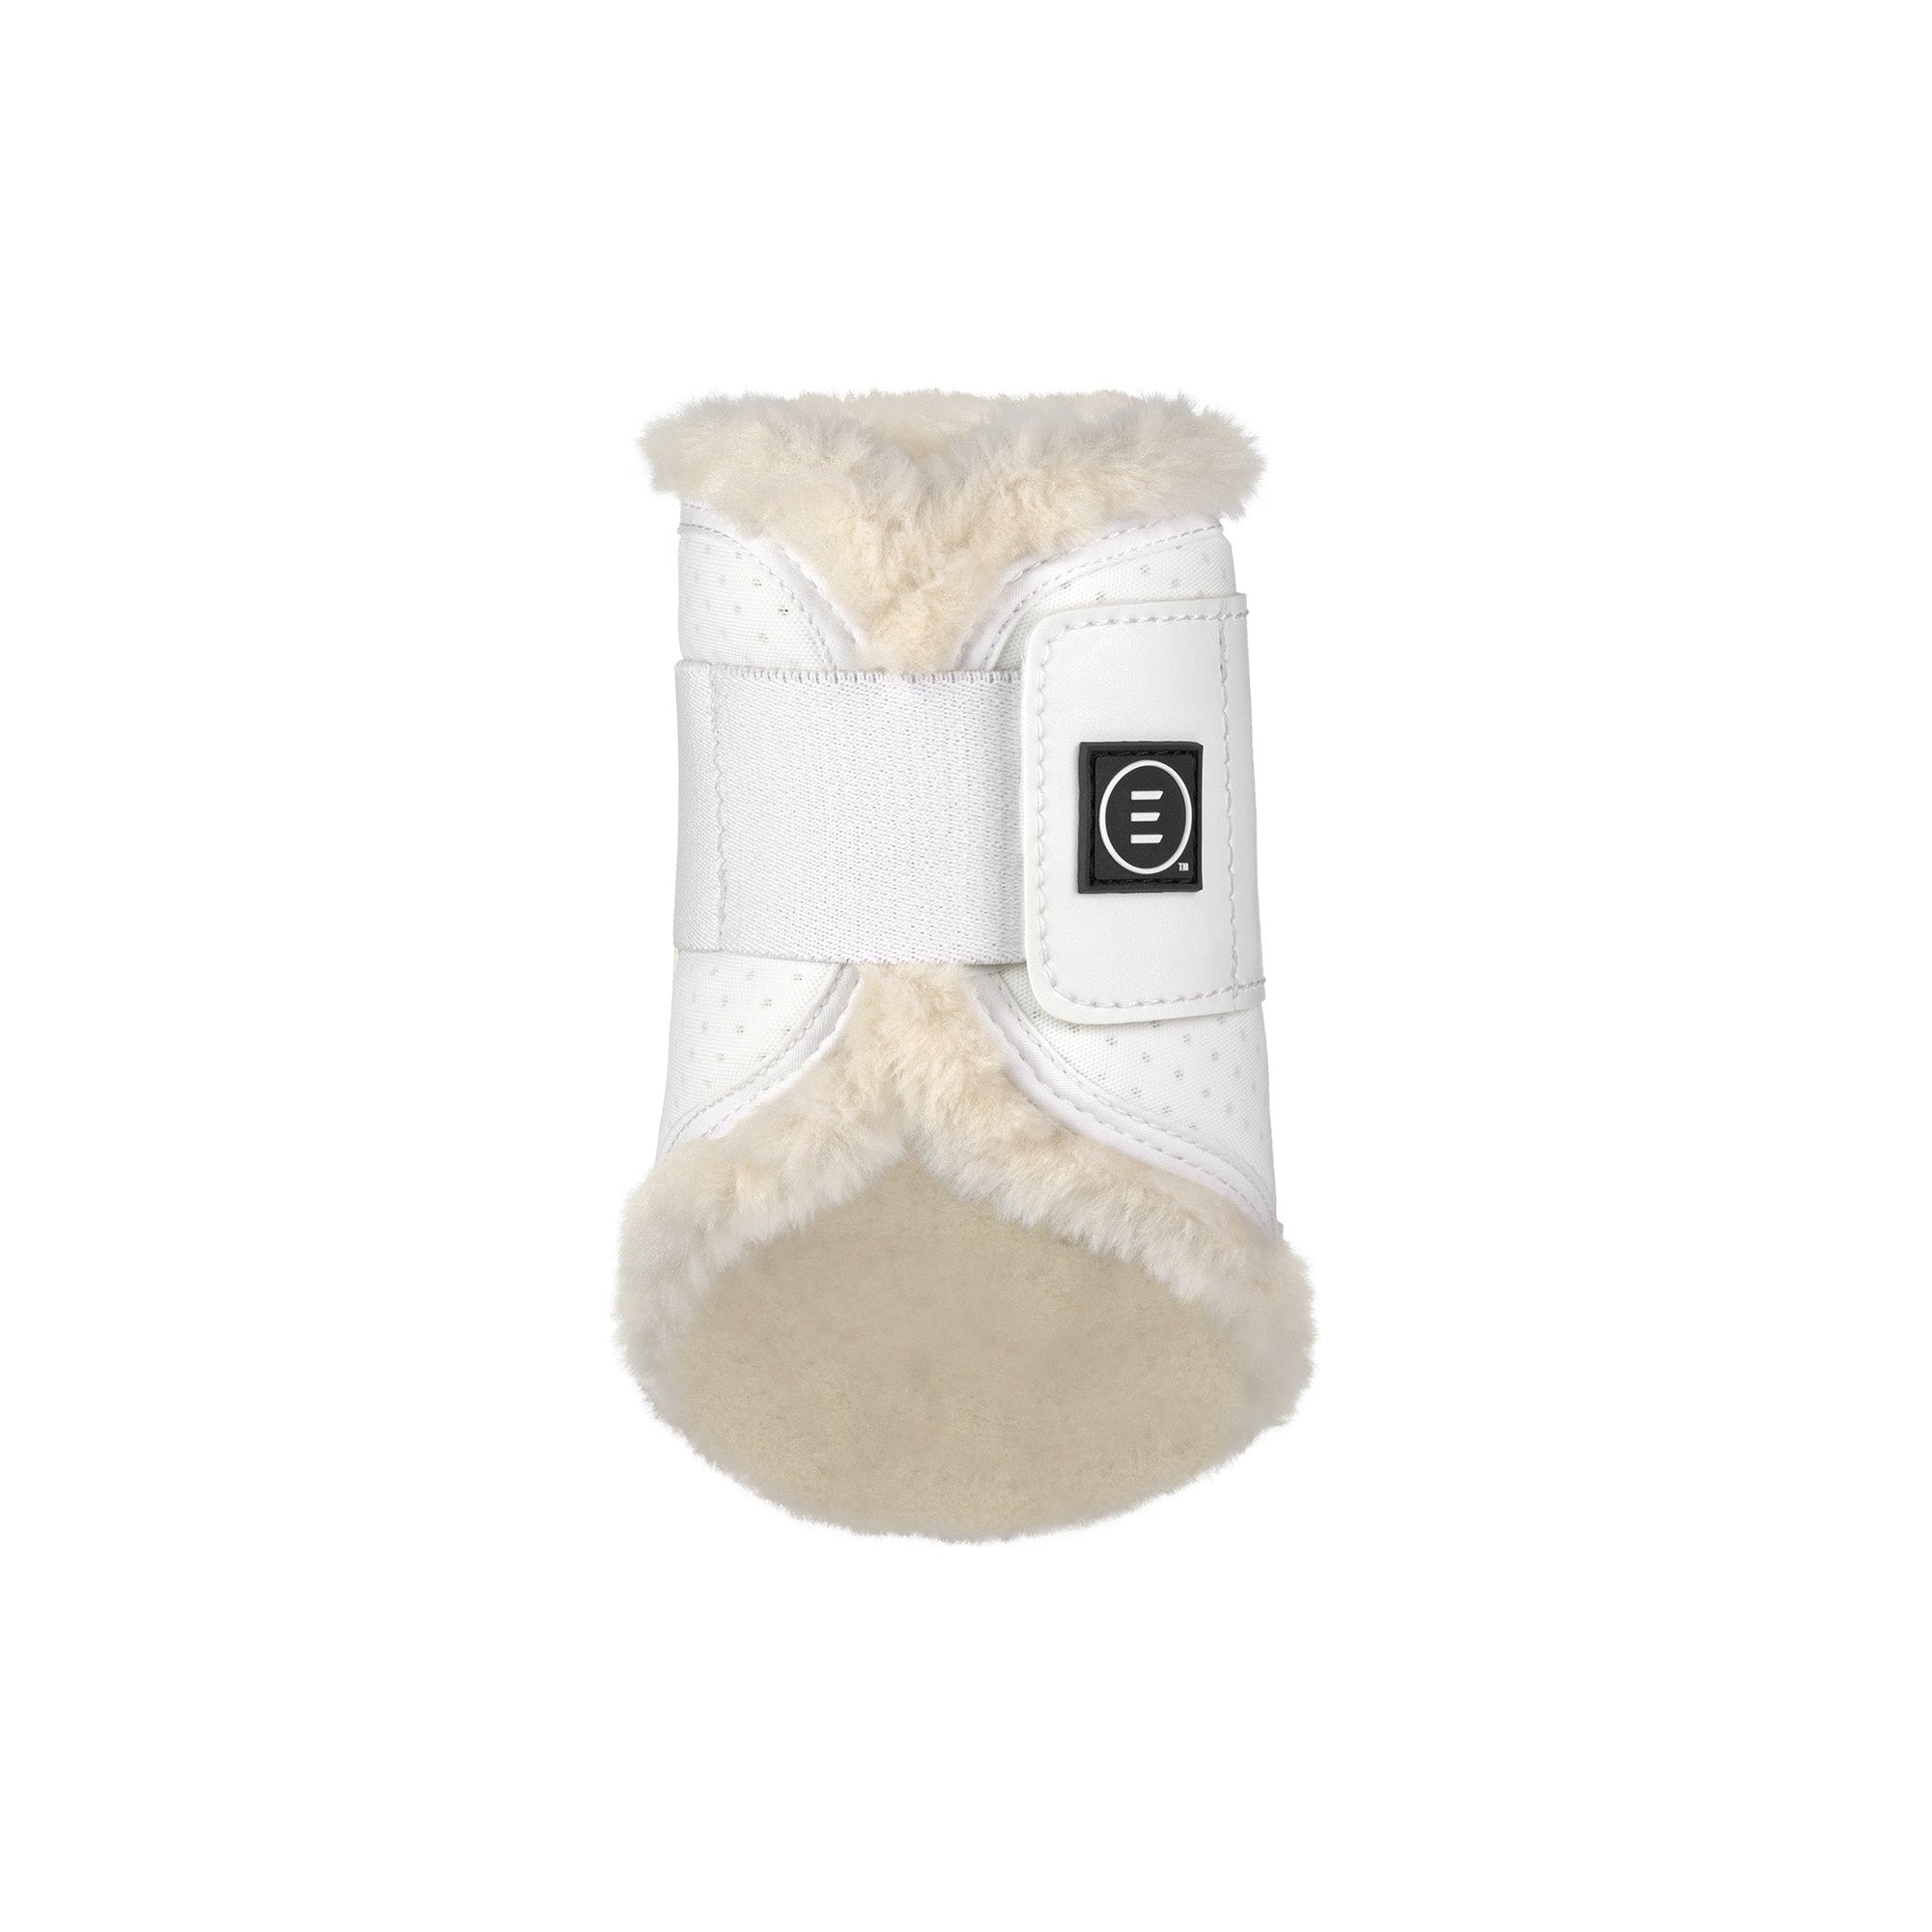 The Essential EveryDay Hind Boot in White with Natural Vegan SheepsWool